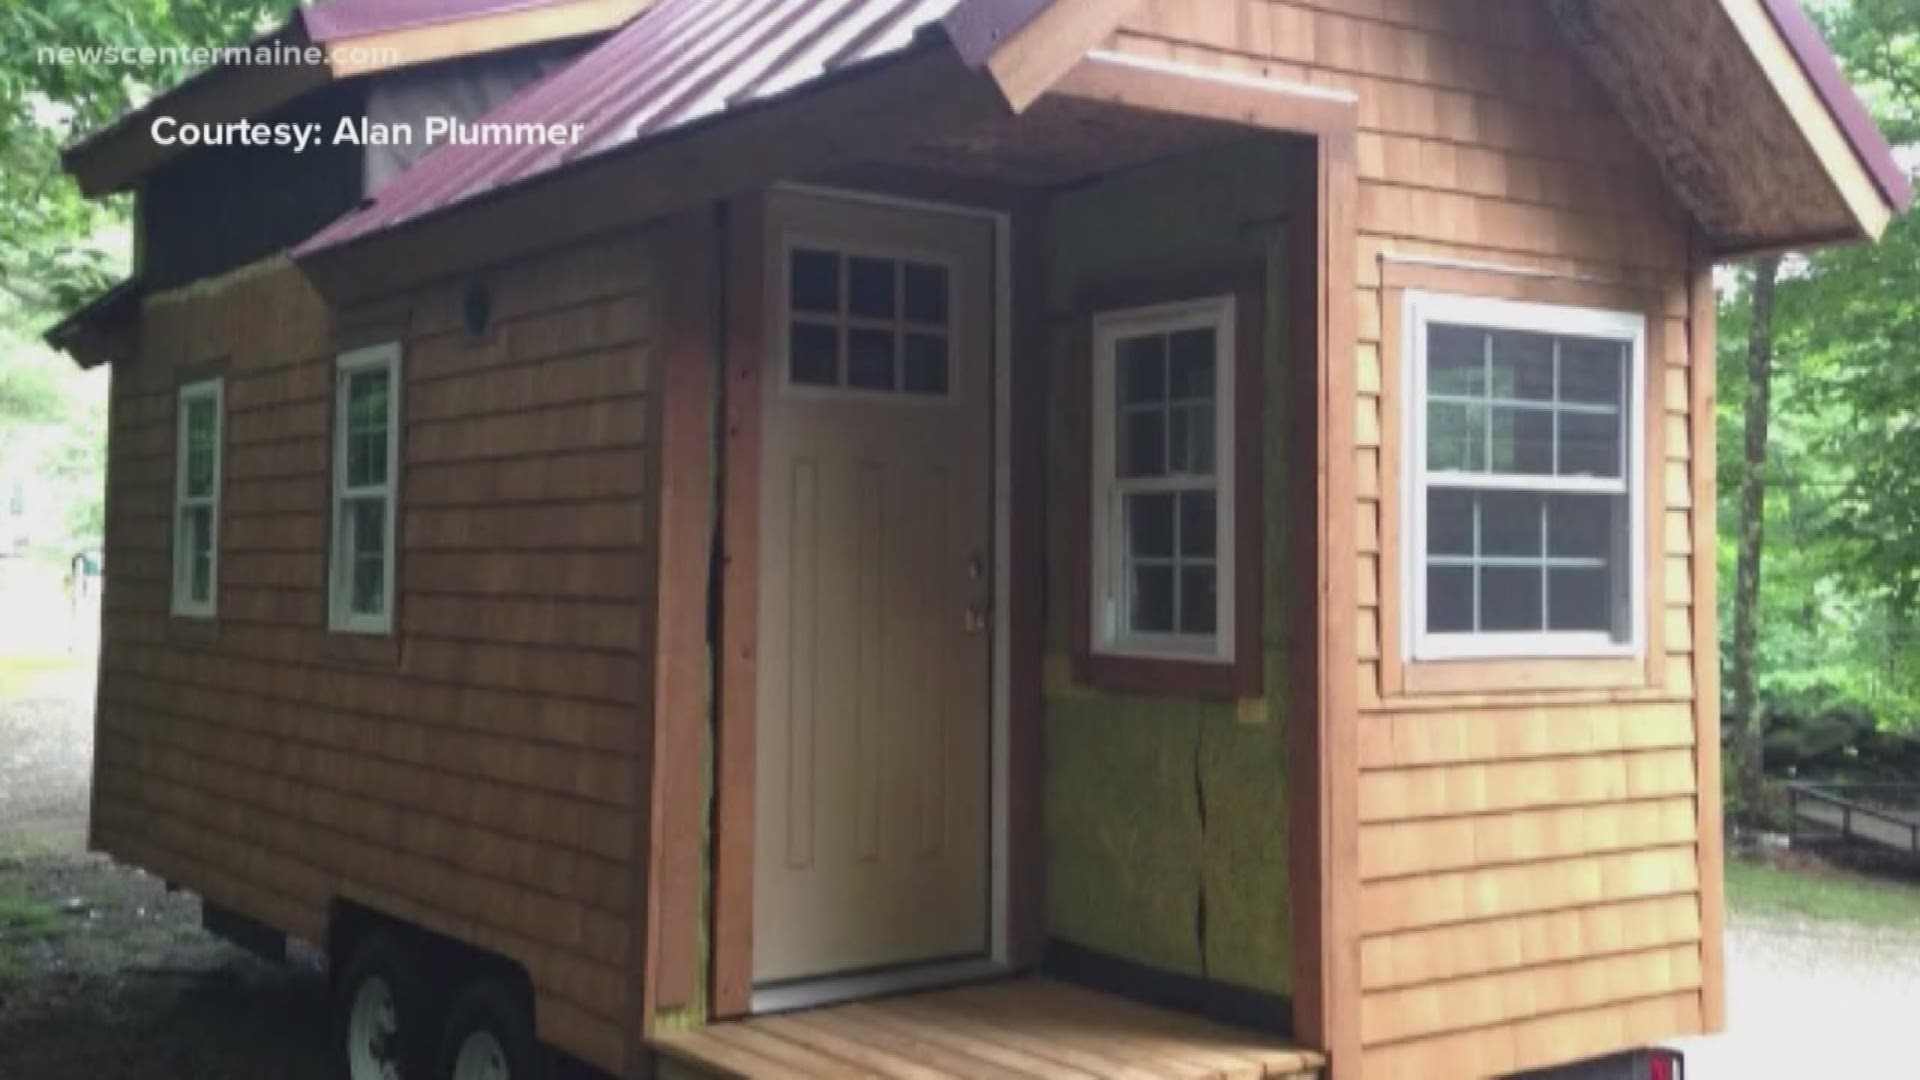 Big obstacles for living in tiny houses